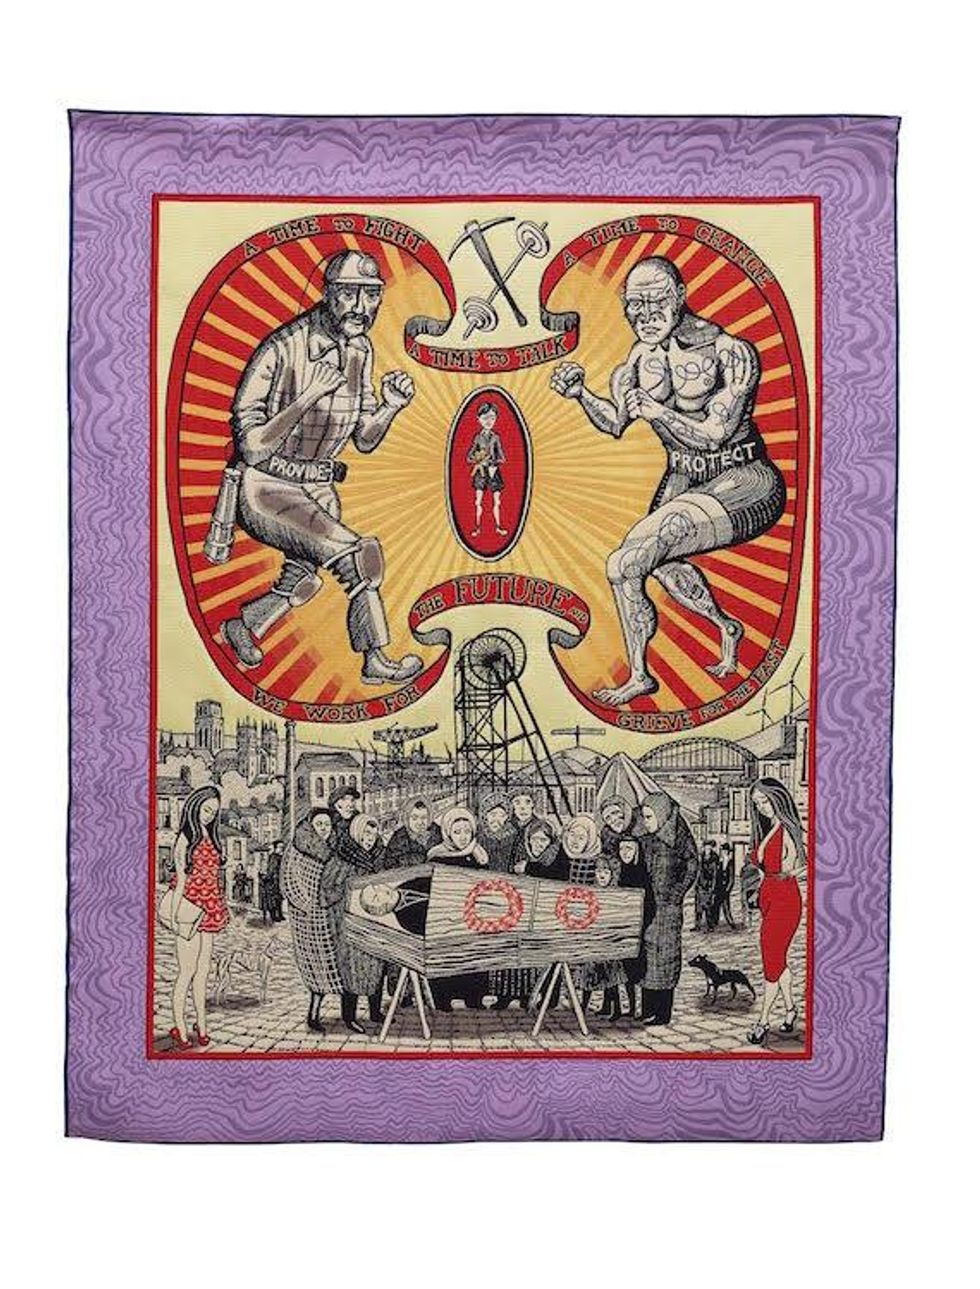 Grayson Perry Presents the Most Popular Art Exhibition Ever!